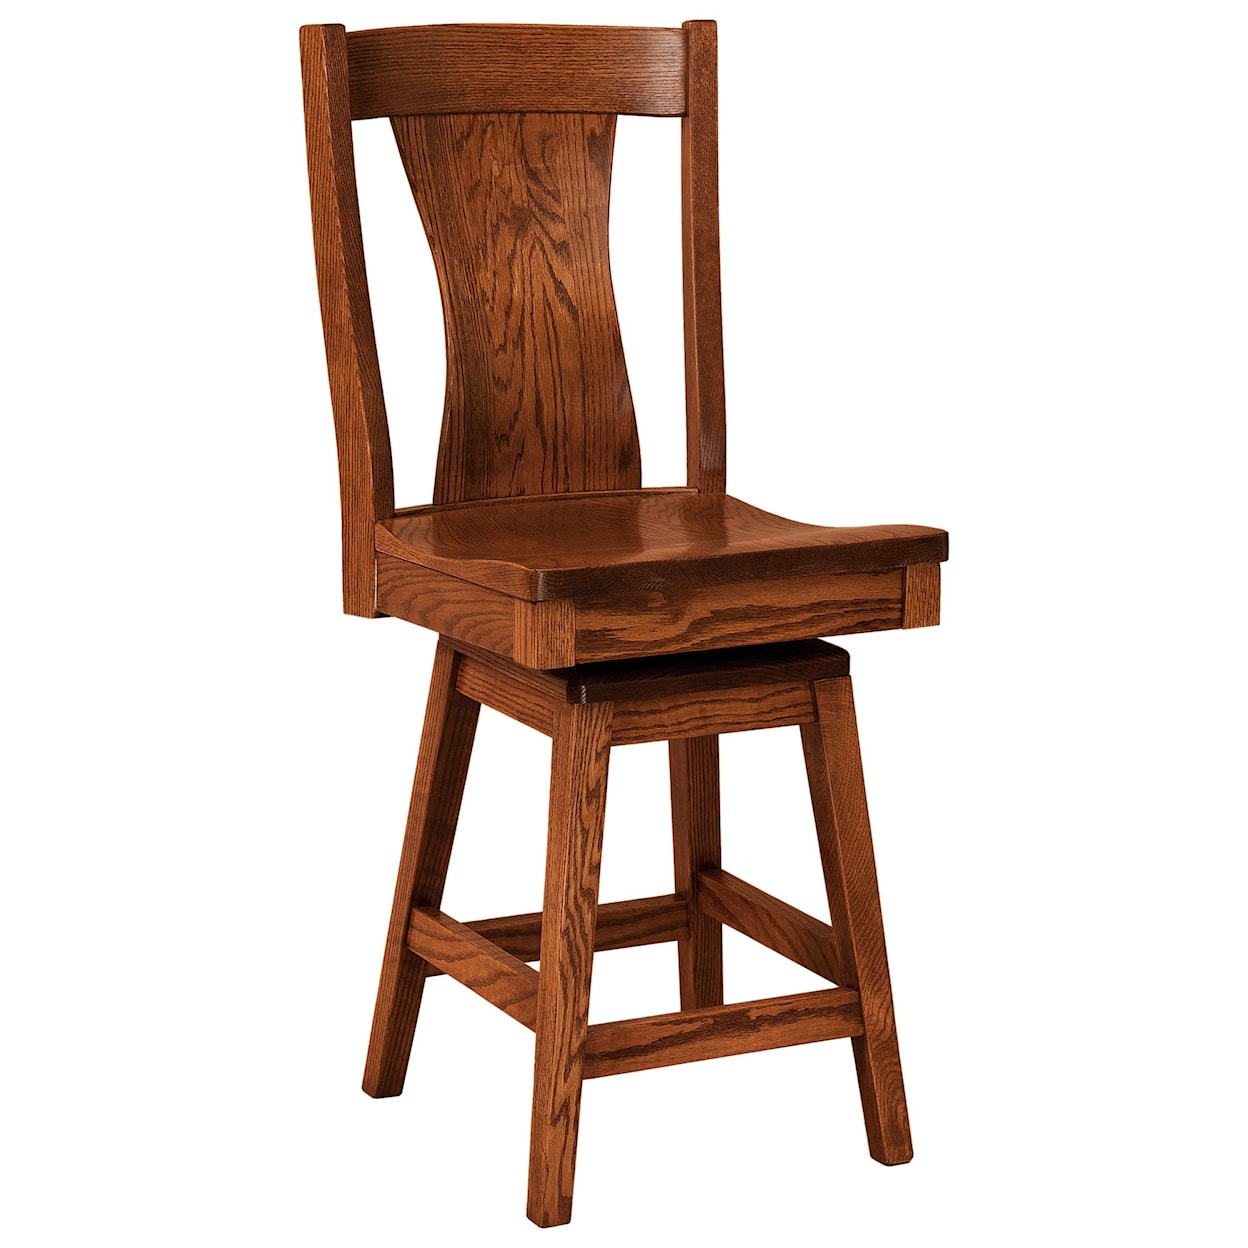 F&N Woodworking Westin Swivel Counter Height Stool - Leather Seat